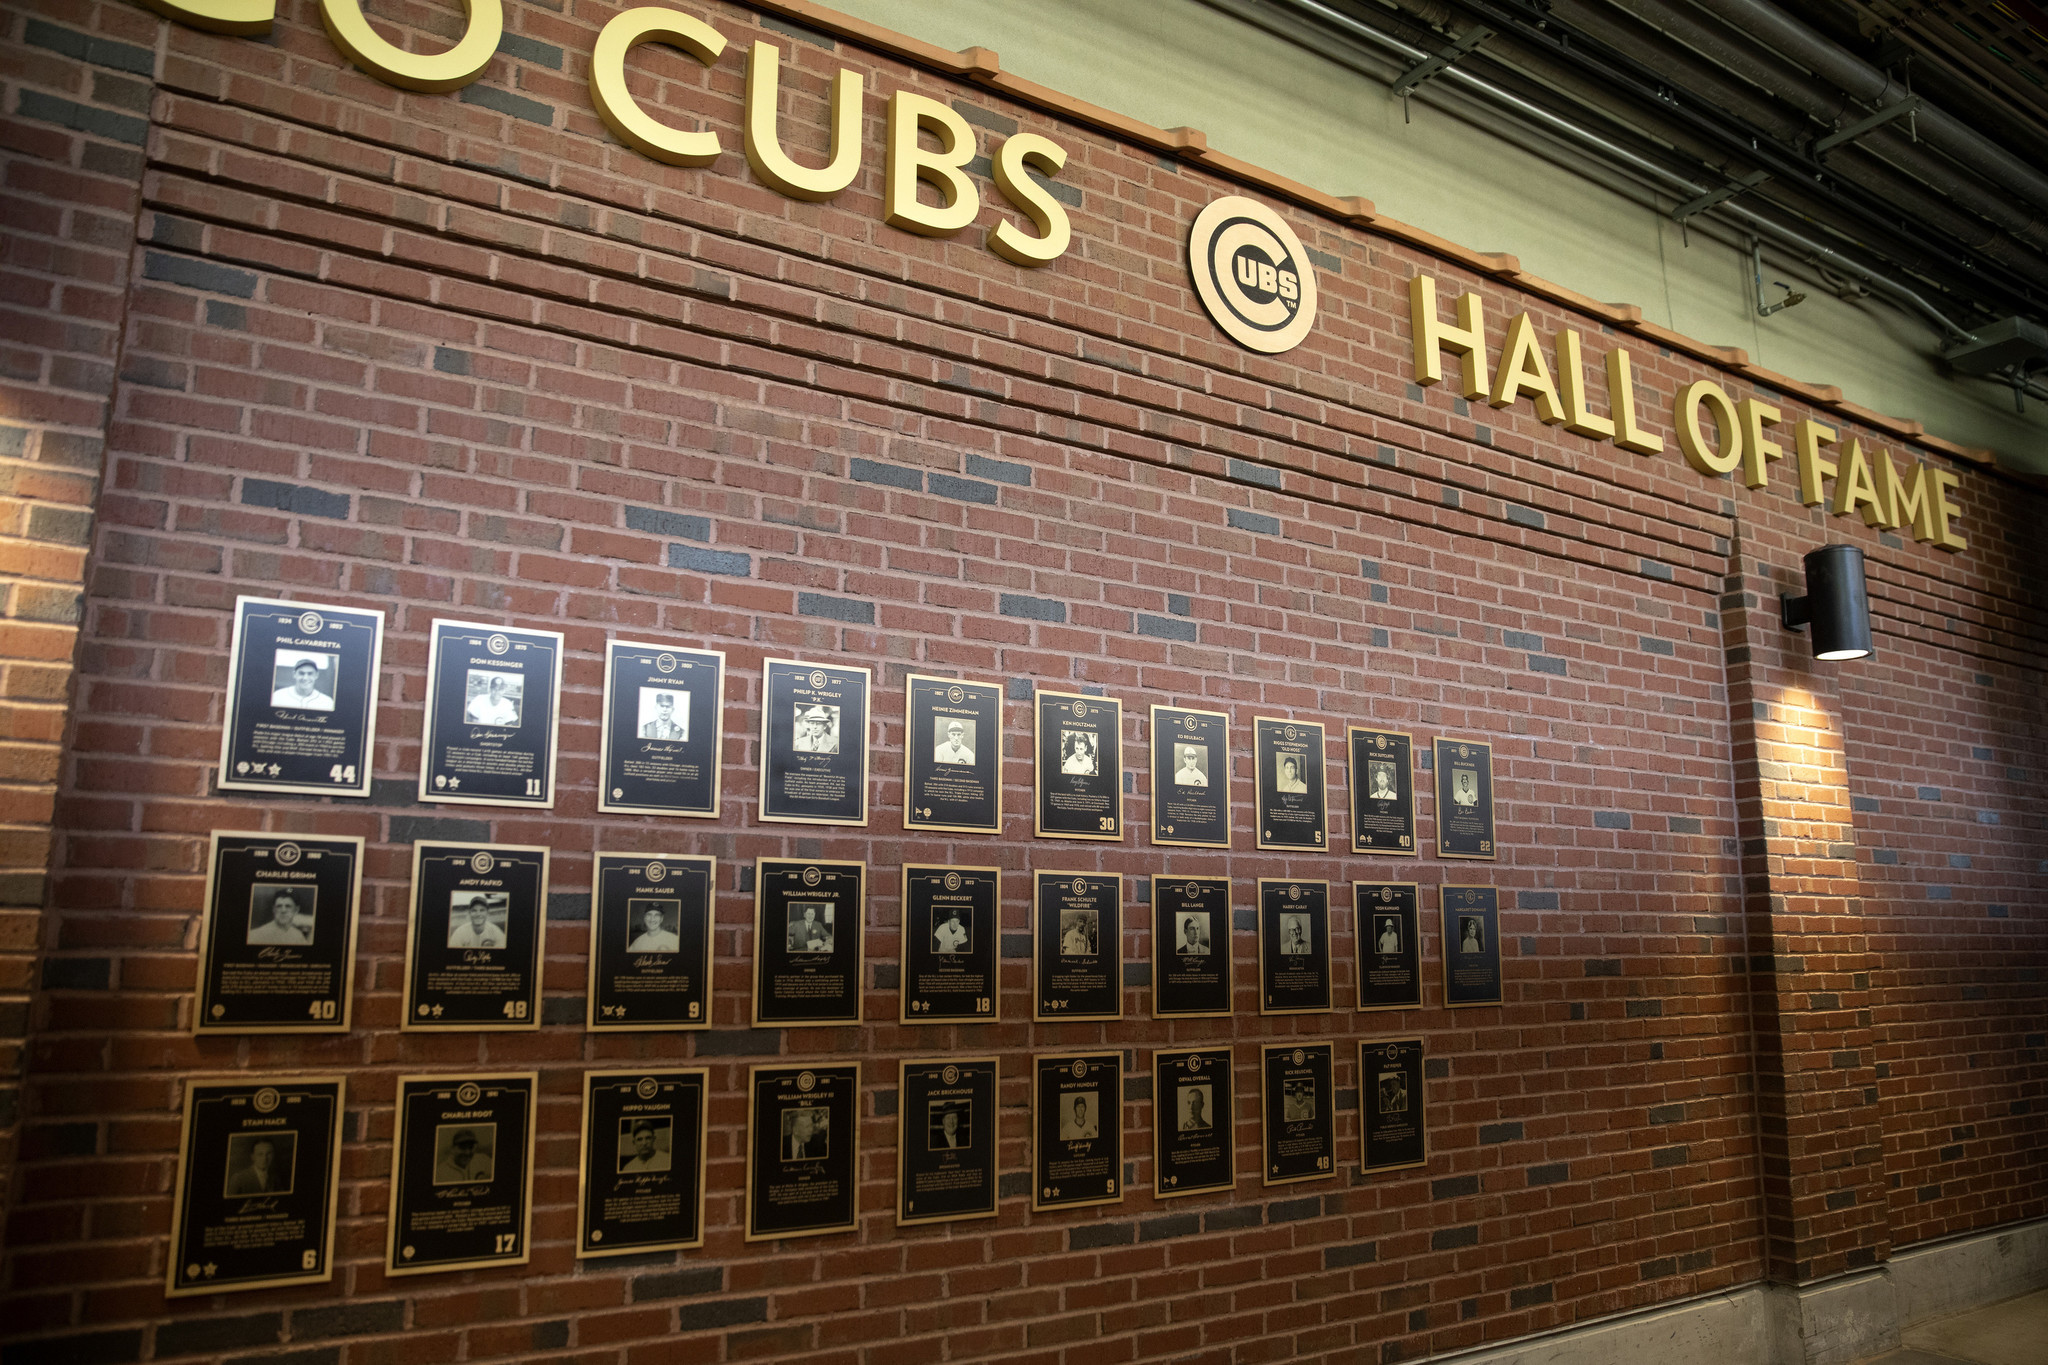 This Day in Chicago Cubs History: The Cubs Acquire Hall of Famer